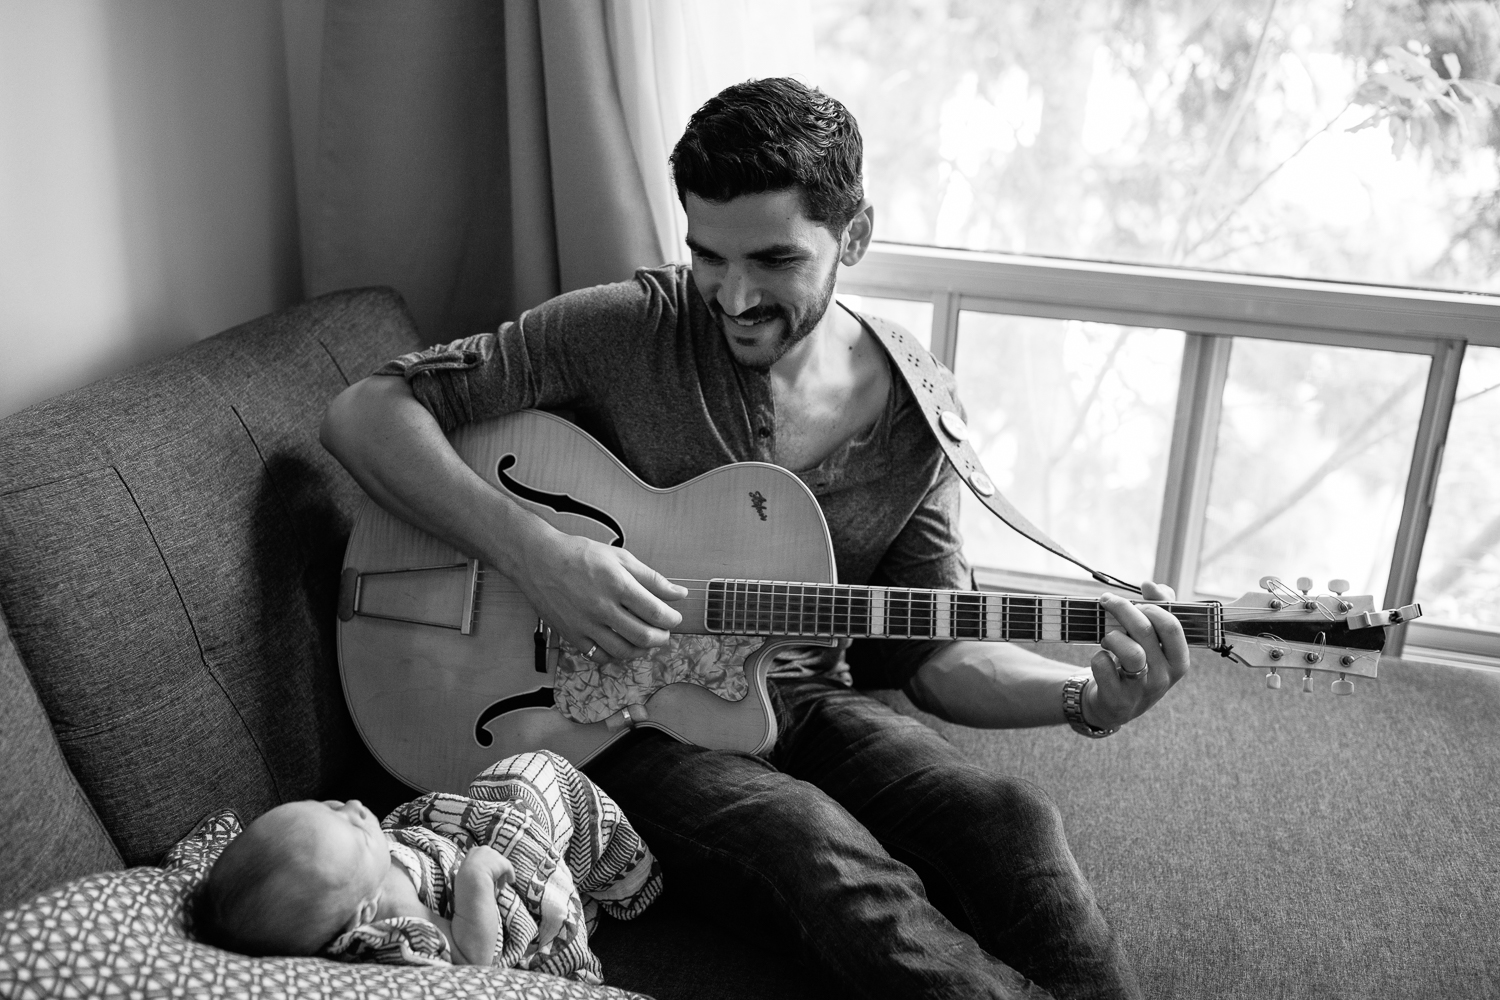 new dad sitting on living room couch playing guitar and singing to 2 week old baby boy lying against cushions - York Region Lifestyle Photography